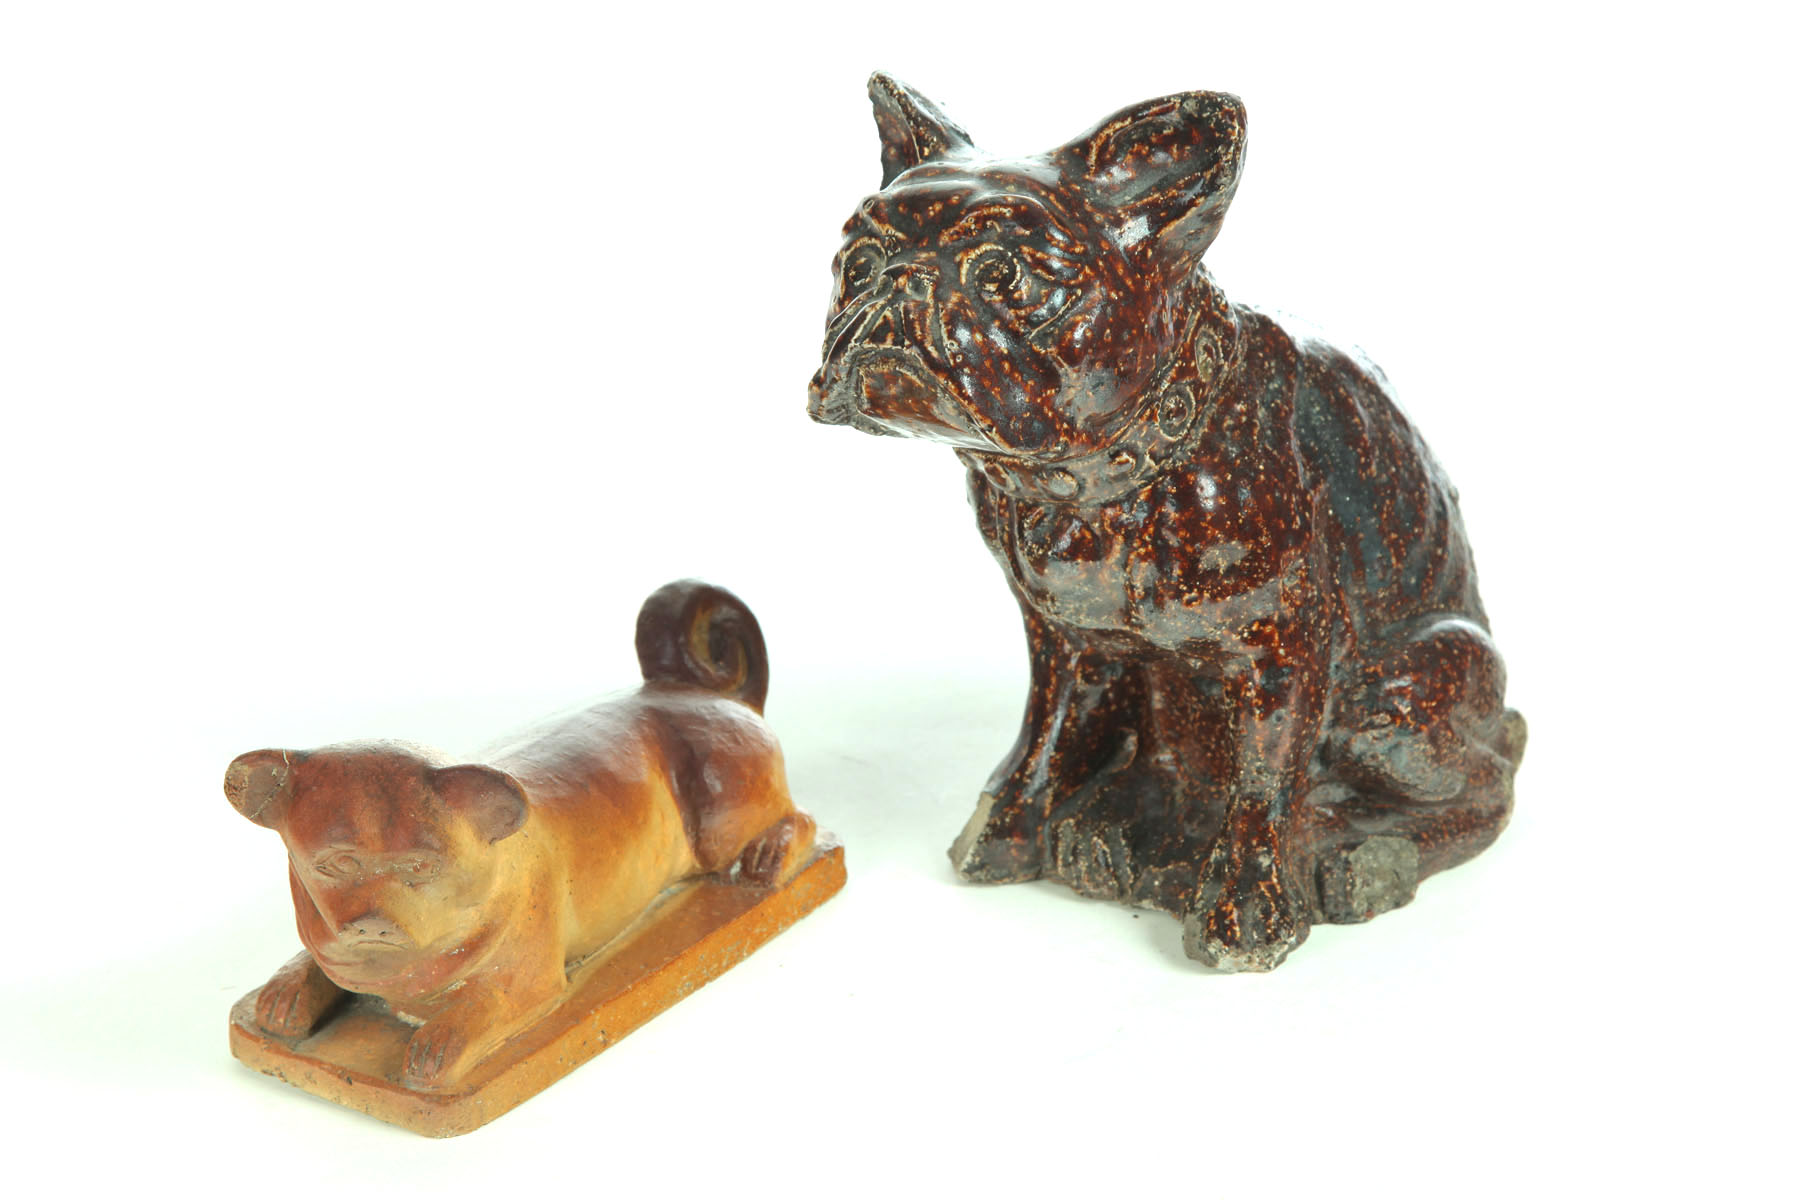 TWO SEWERTILE DOGS.  Probably Ohio